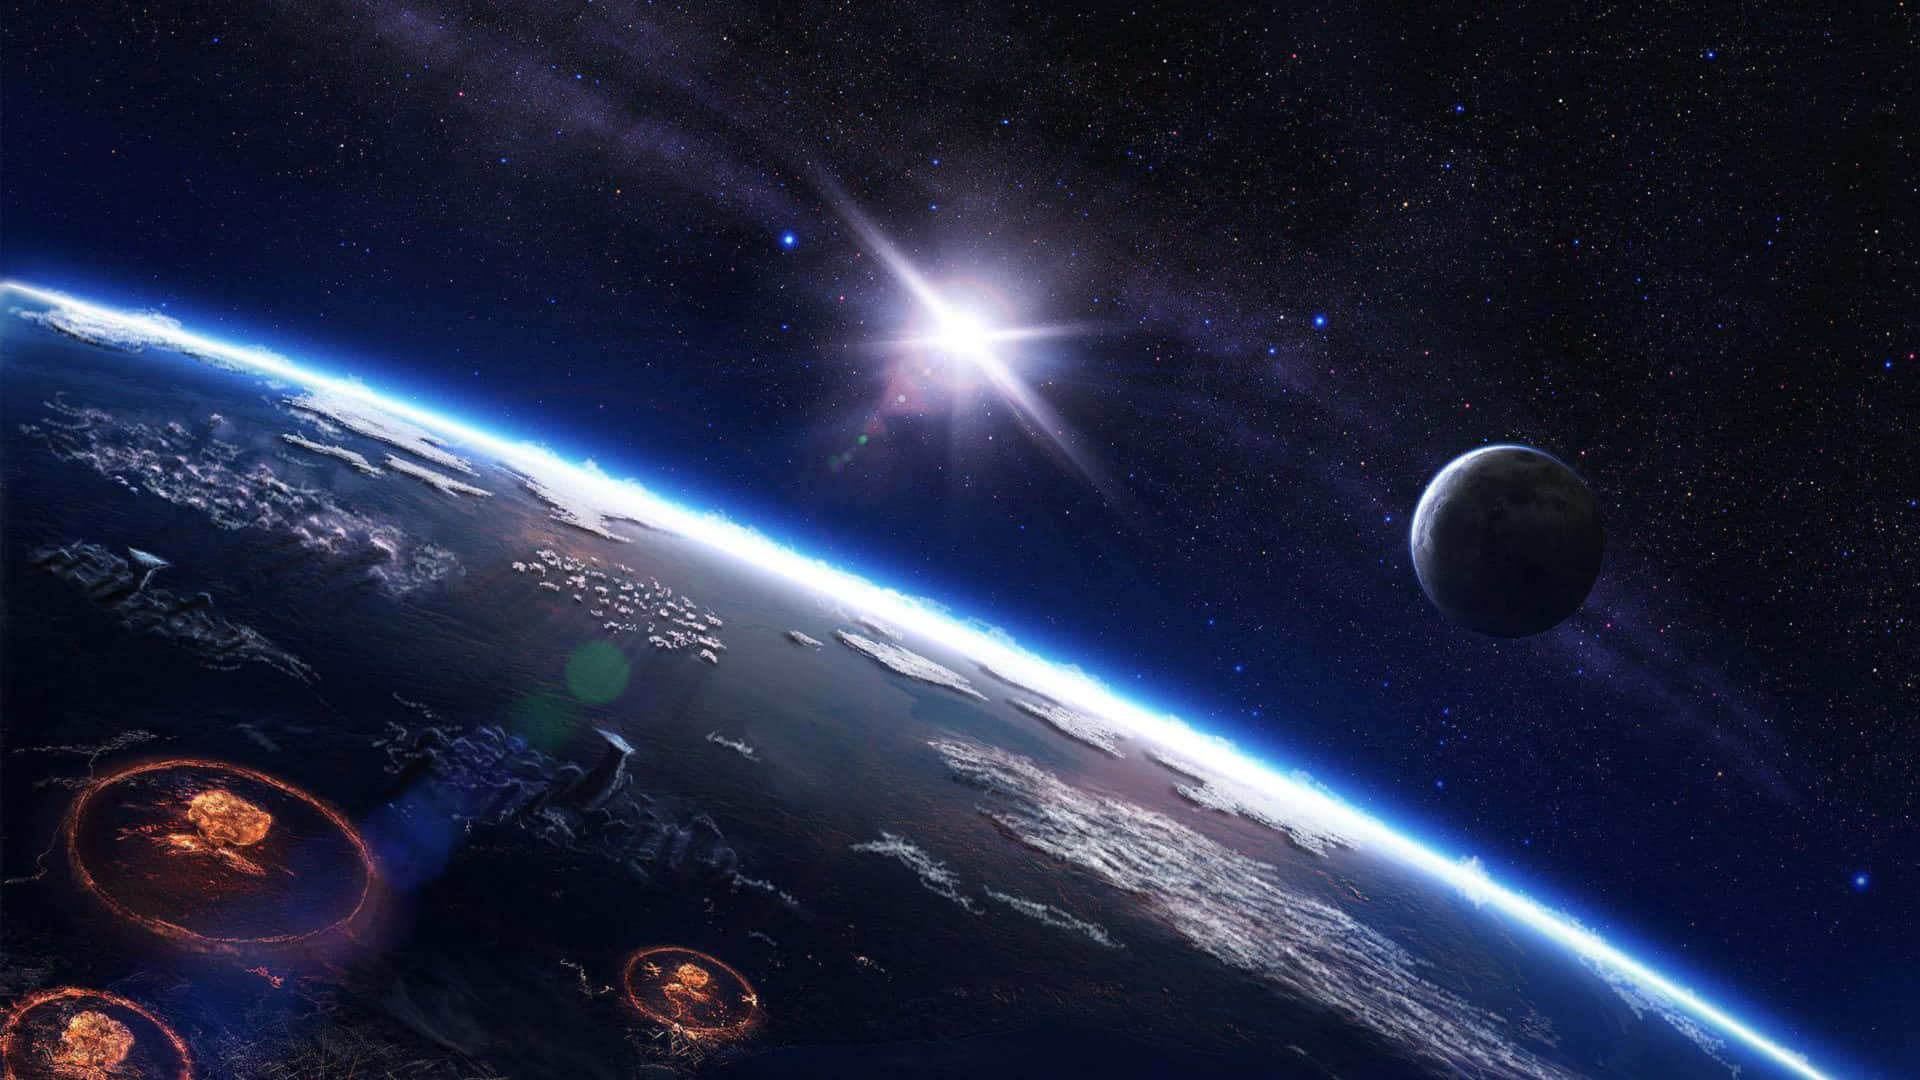 Explore the vastness of outer space with this captivating desktop background